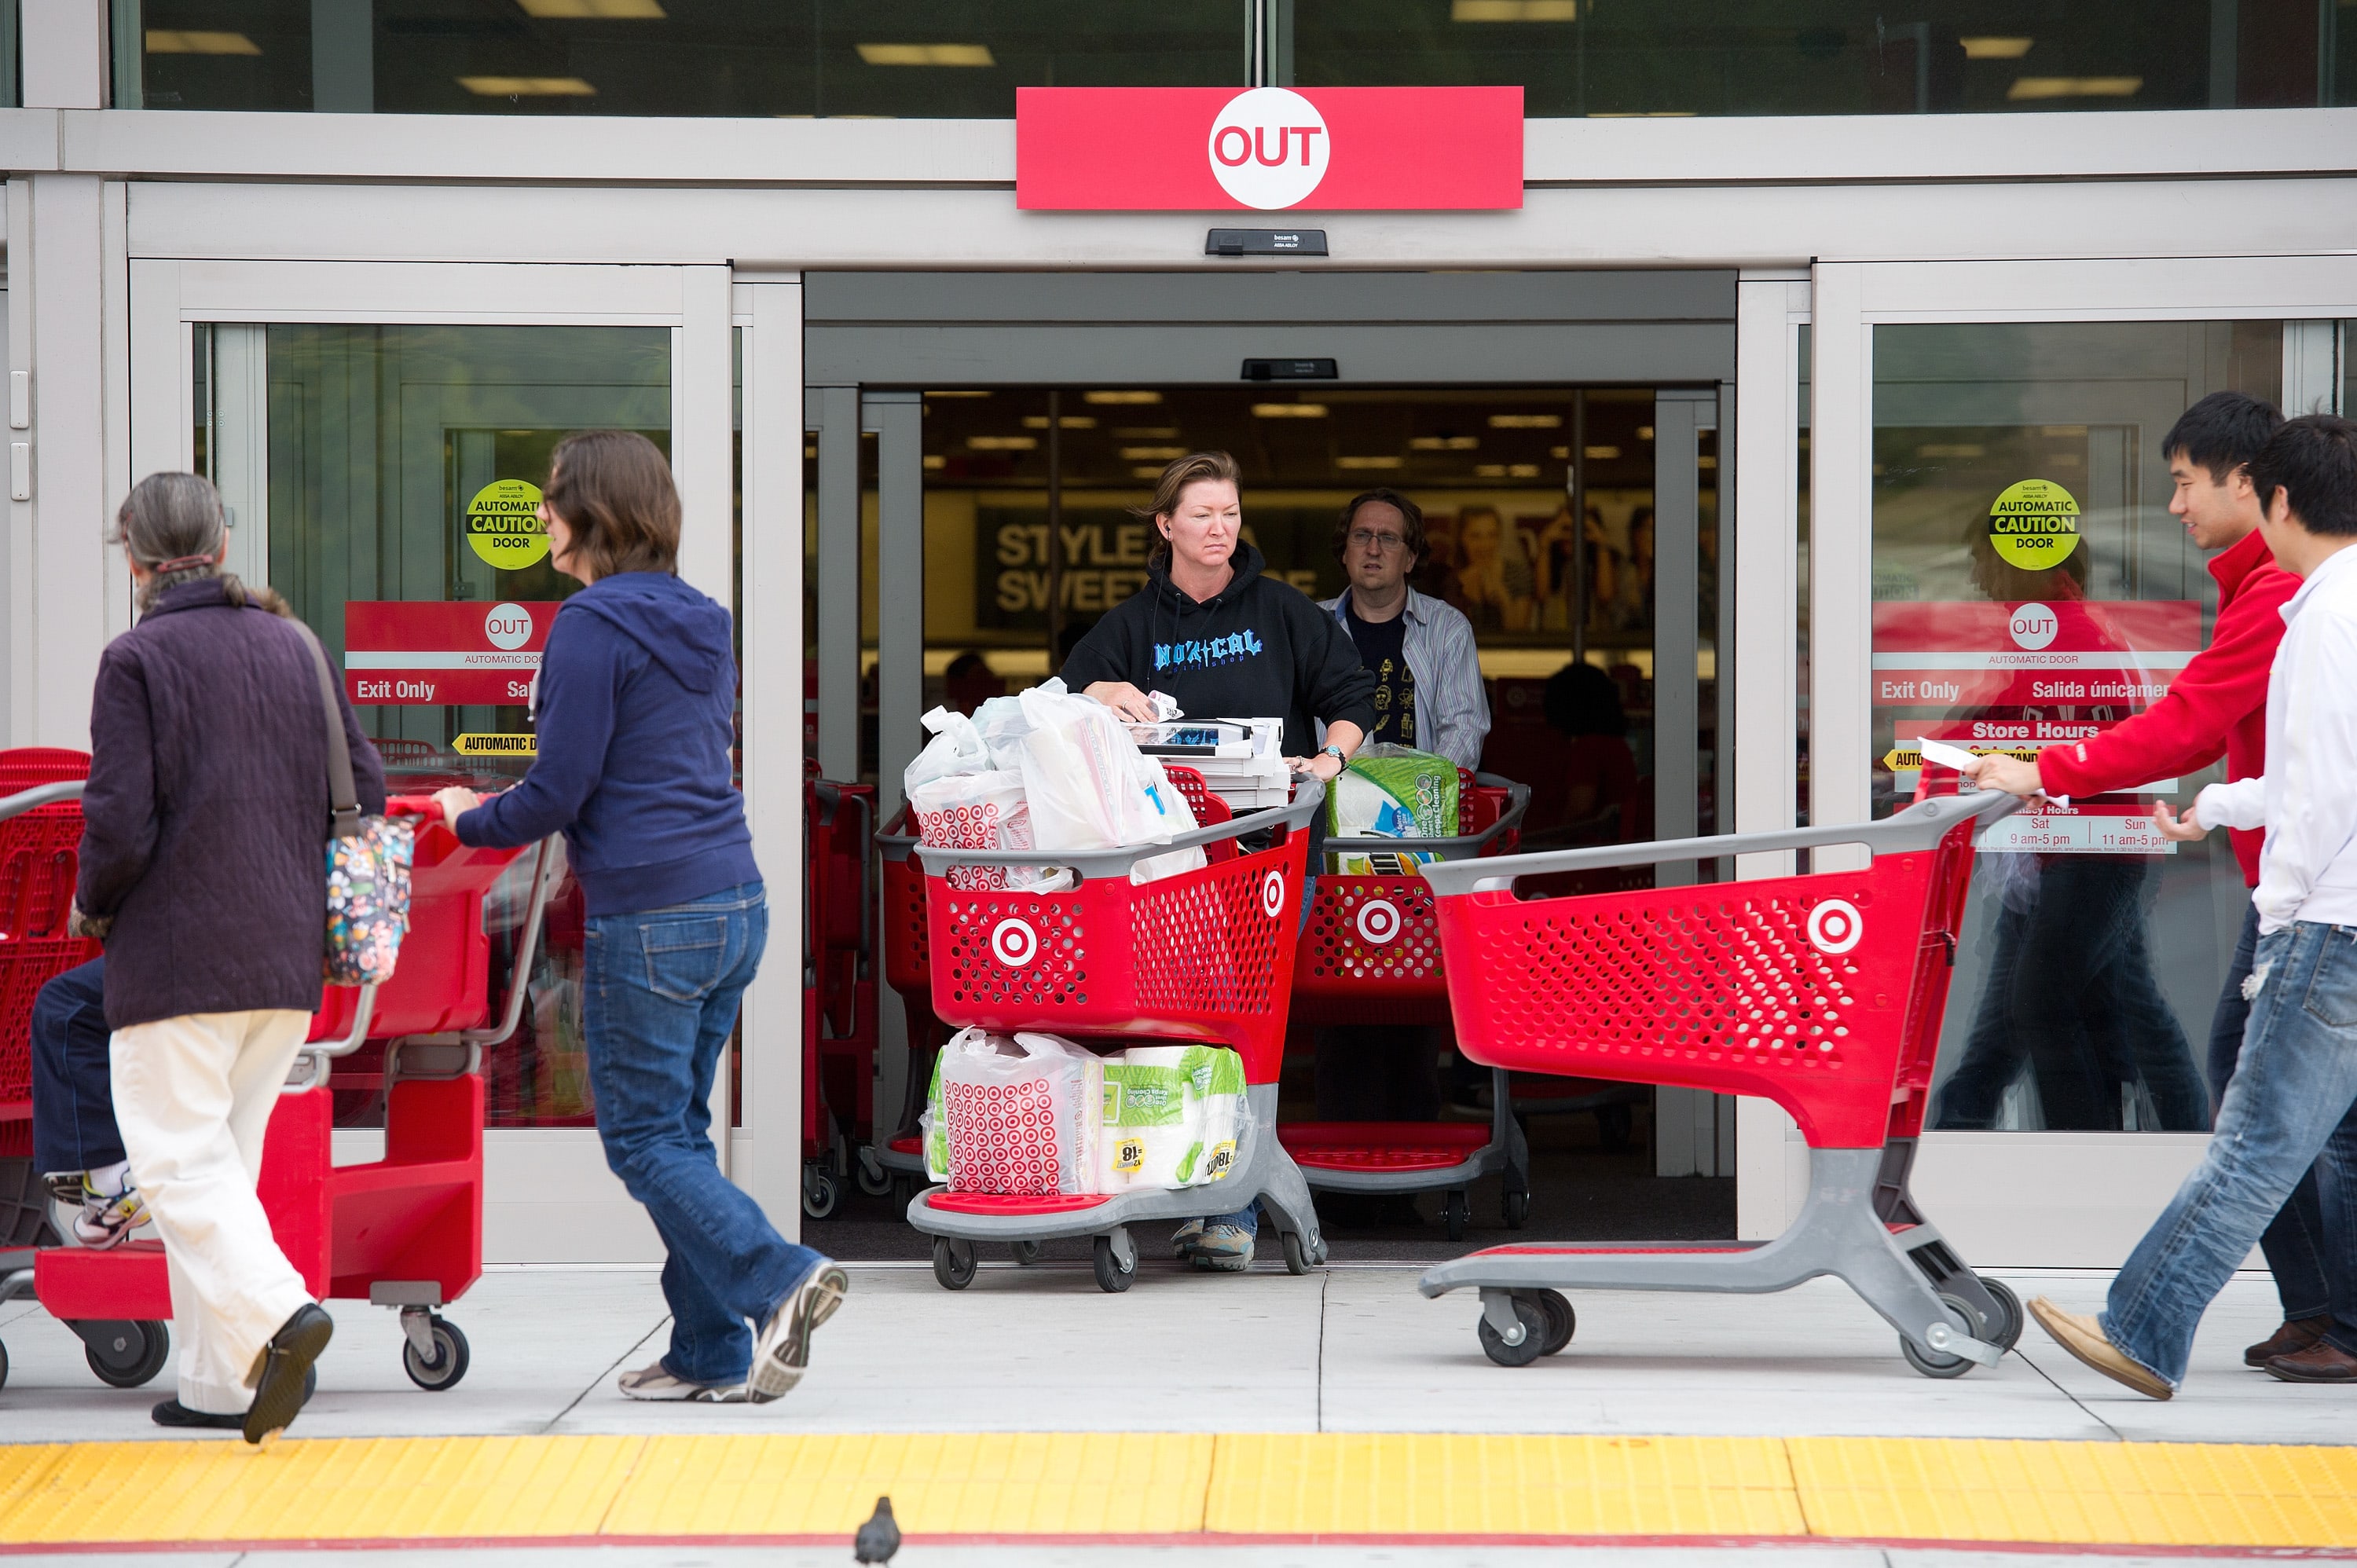 Target still has room to climb after 20% gain, Citi says